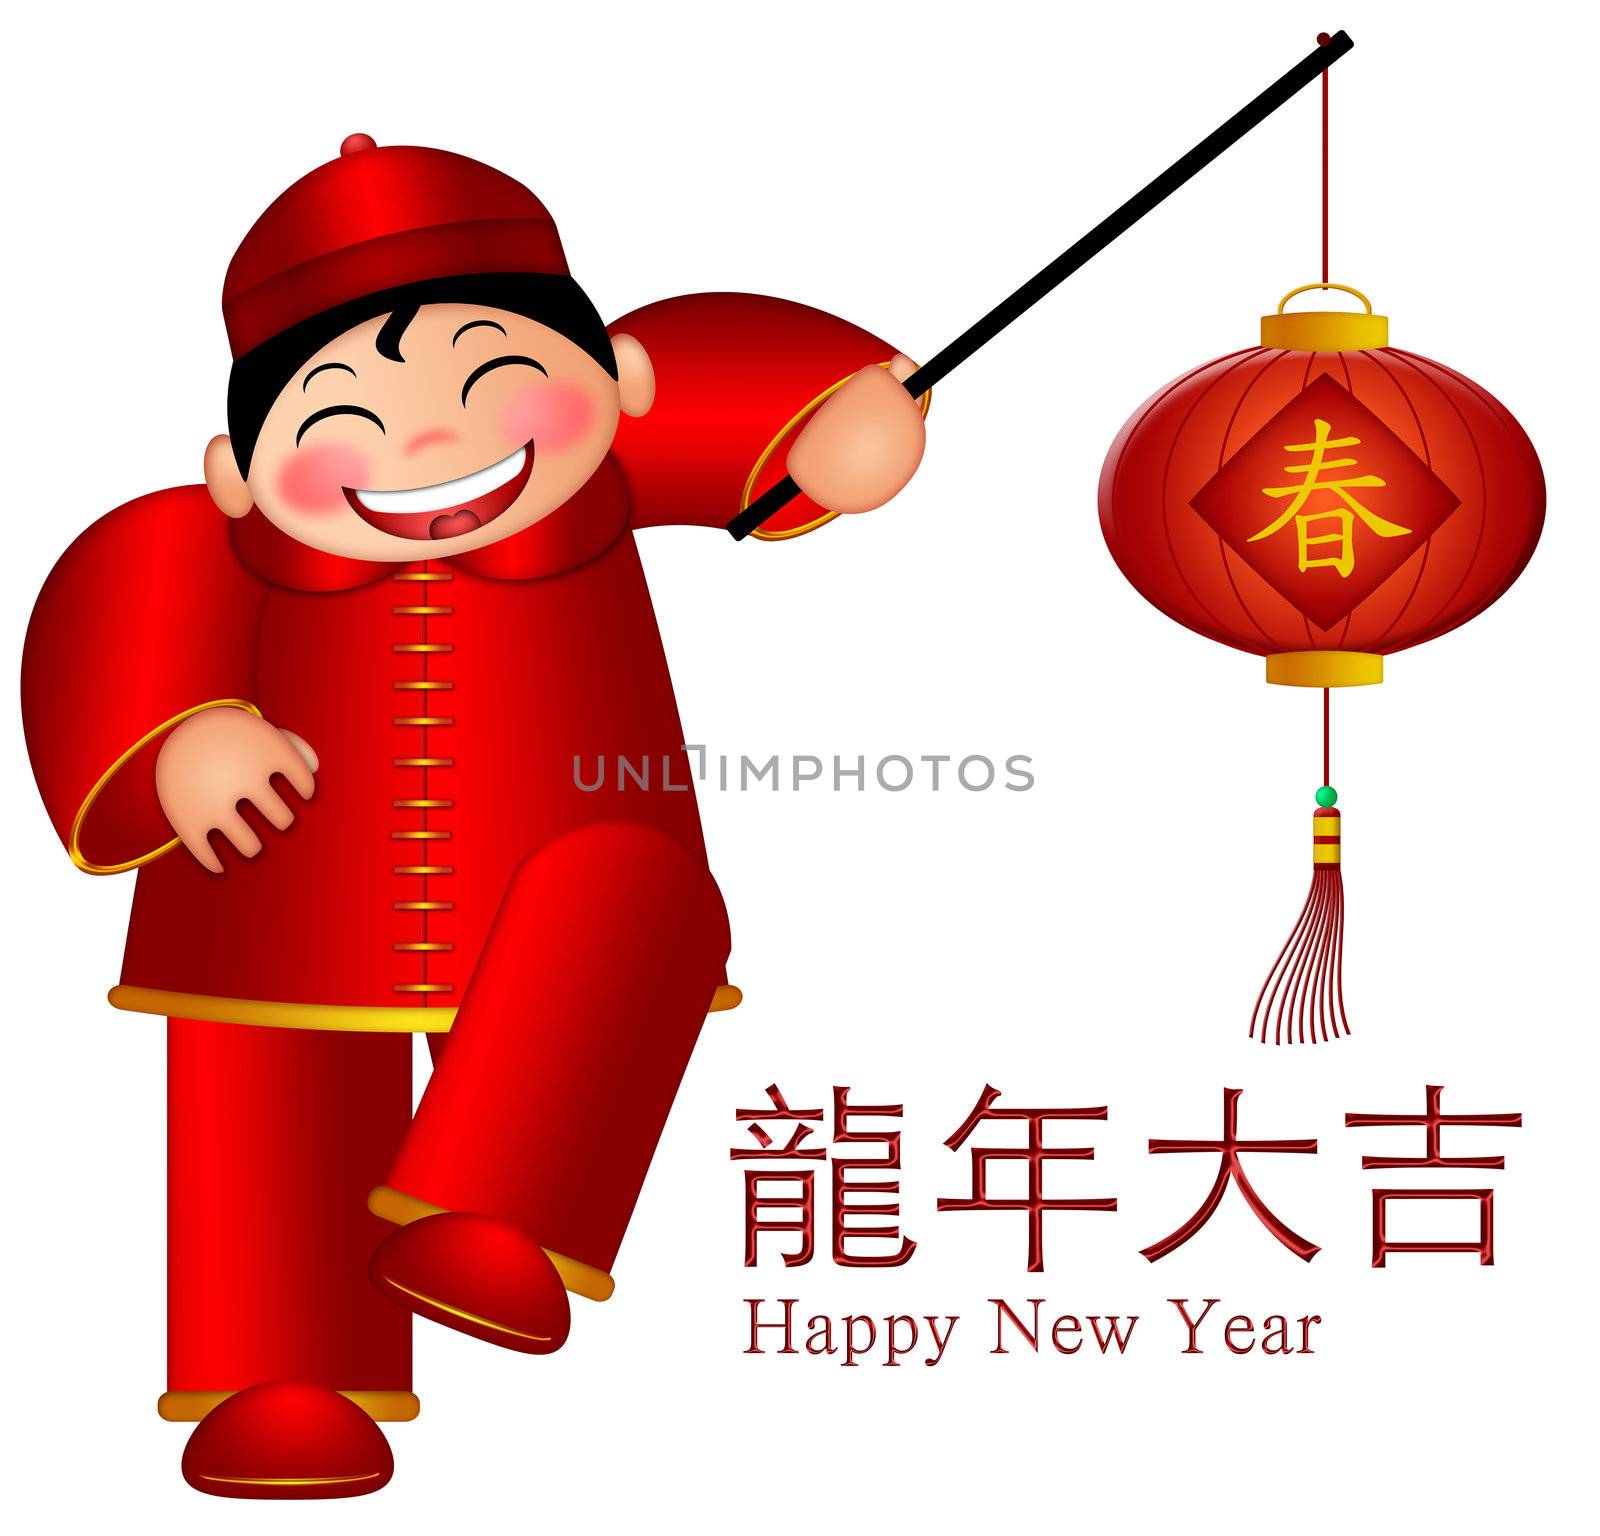 Chinese Boy Holding Lantern Wishing Good Luck in Year of Dragon by jpldesigns